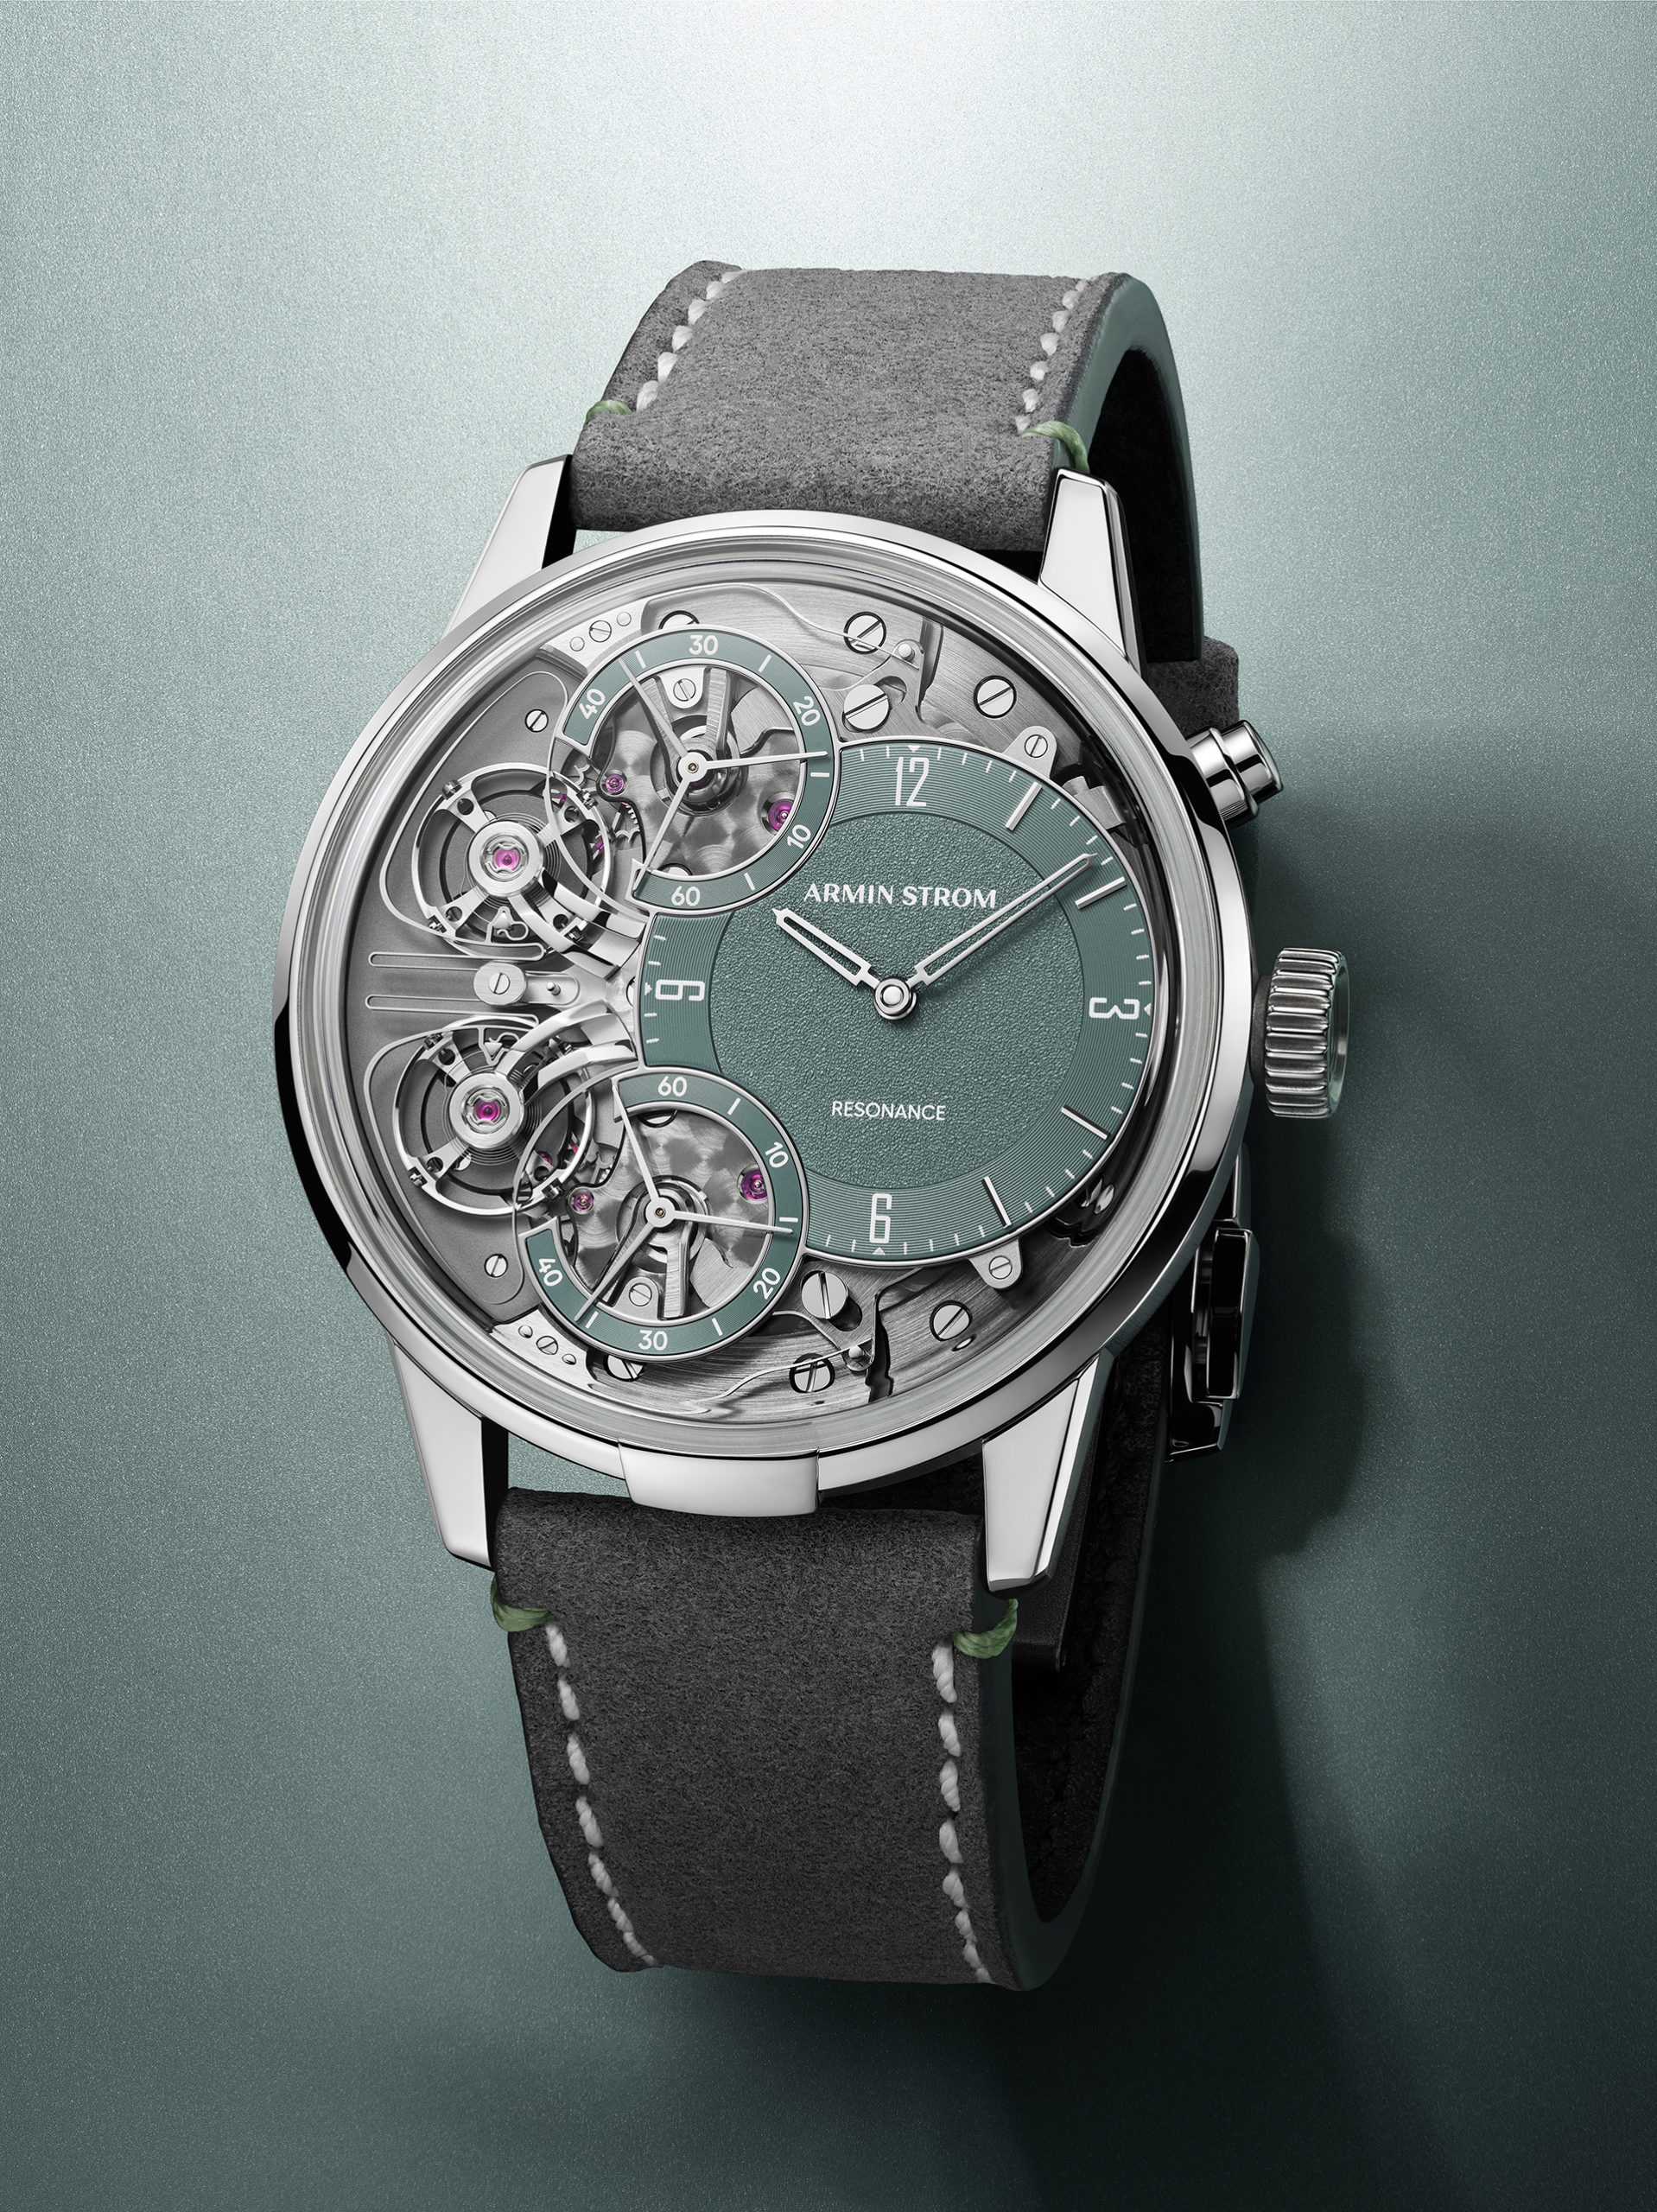 Showing at WatchTime New York 2023: Armin Strom Mirrored Force Resonance Manufacture Edition Green